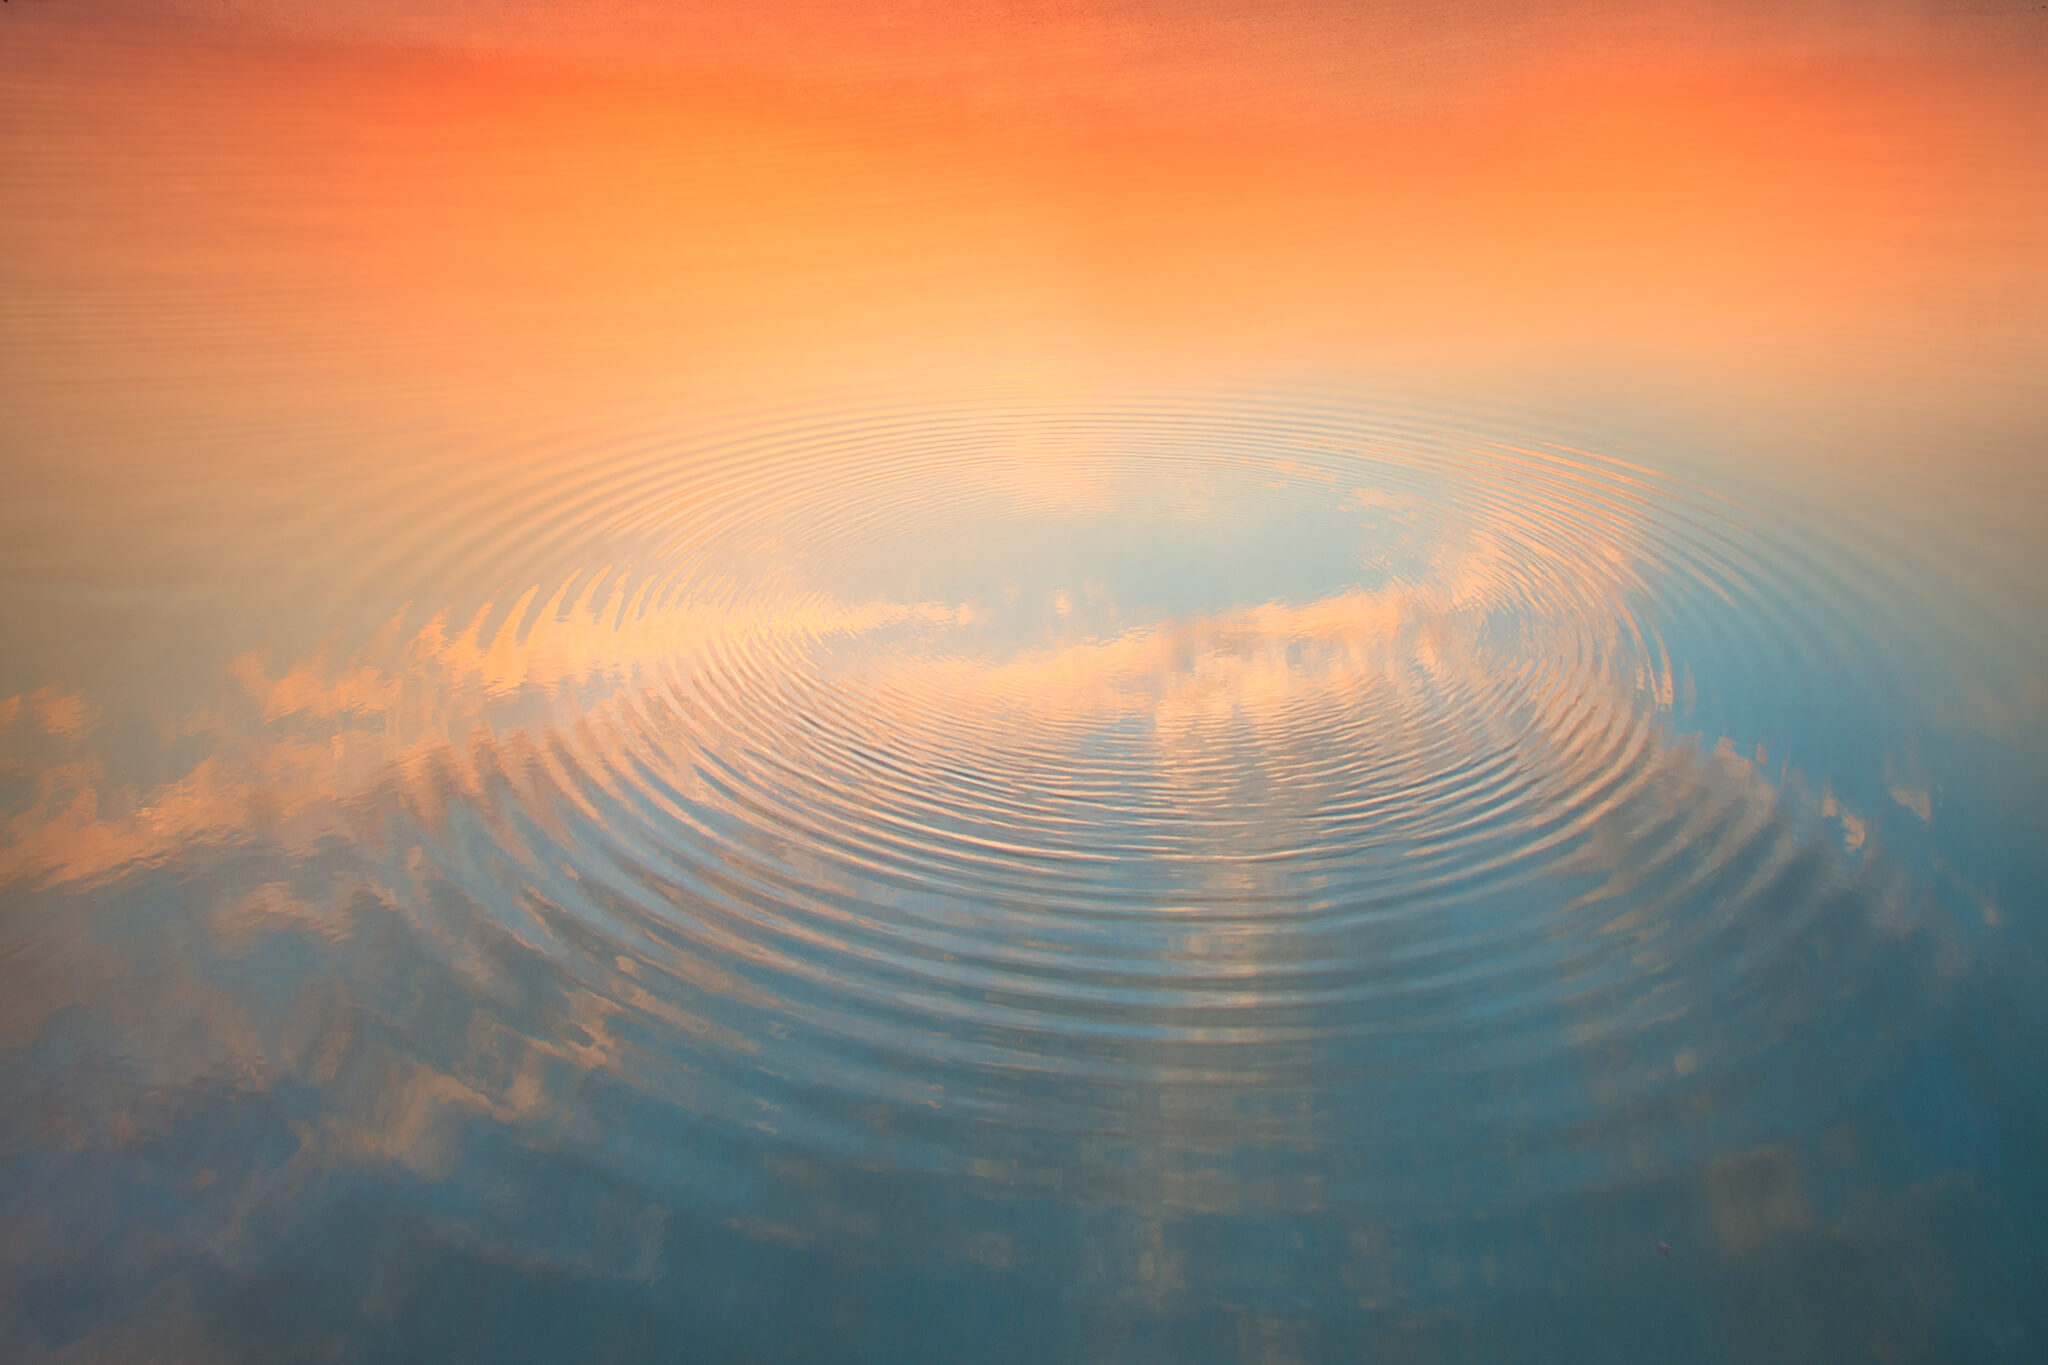 Water Ripple: What Causes Ripples In Water?